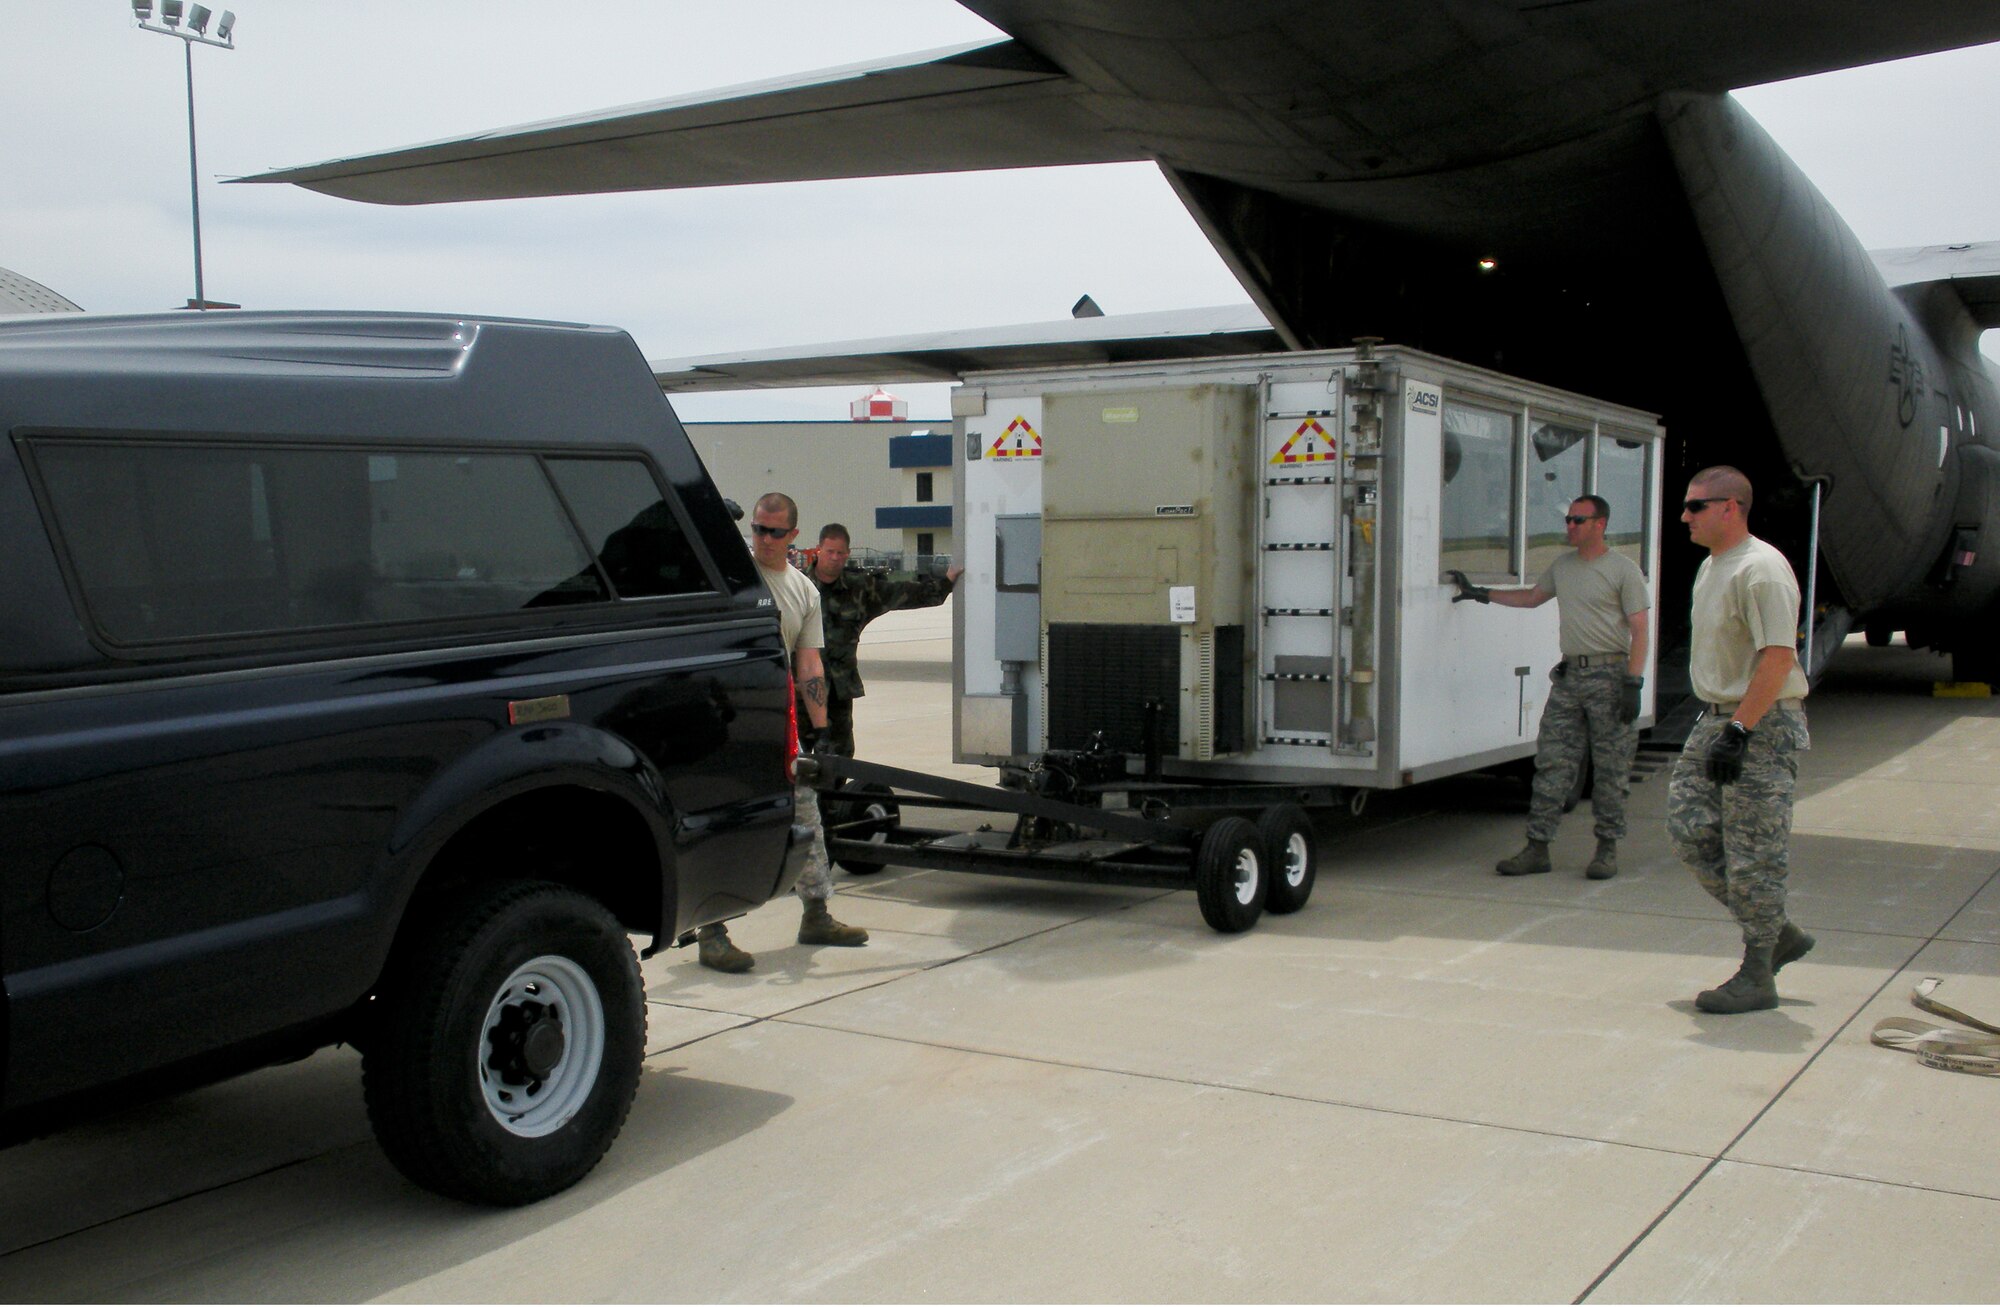 Members of Kentucky Air Guard's 123rd Contingency Response Group off-load a mobile command post as part of Operation Ardent Sentry.